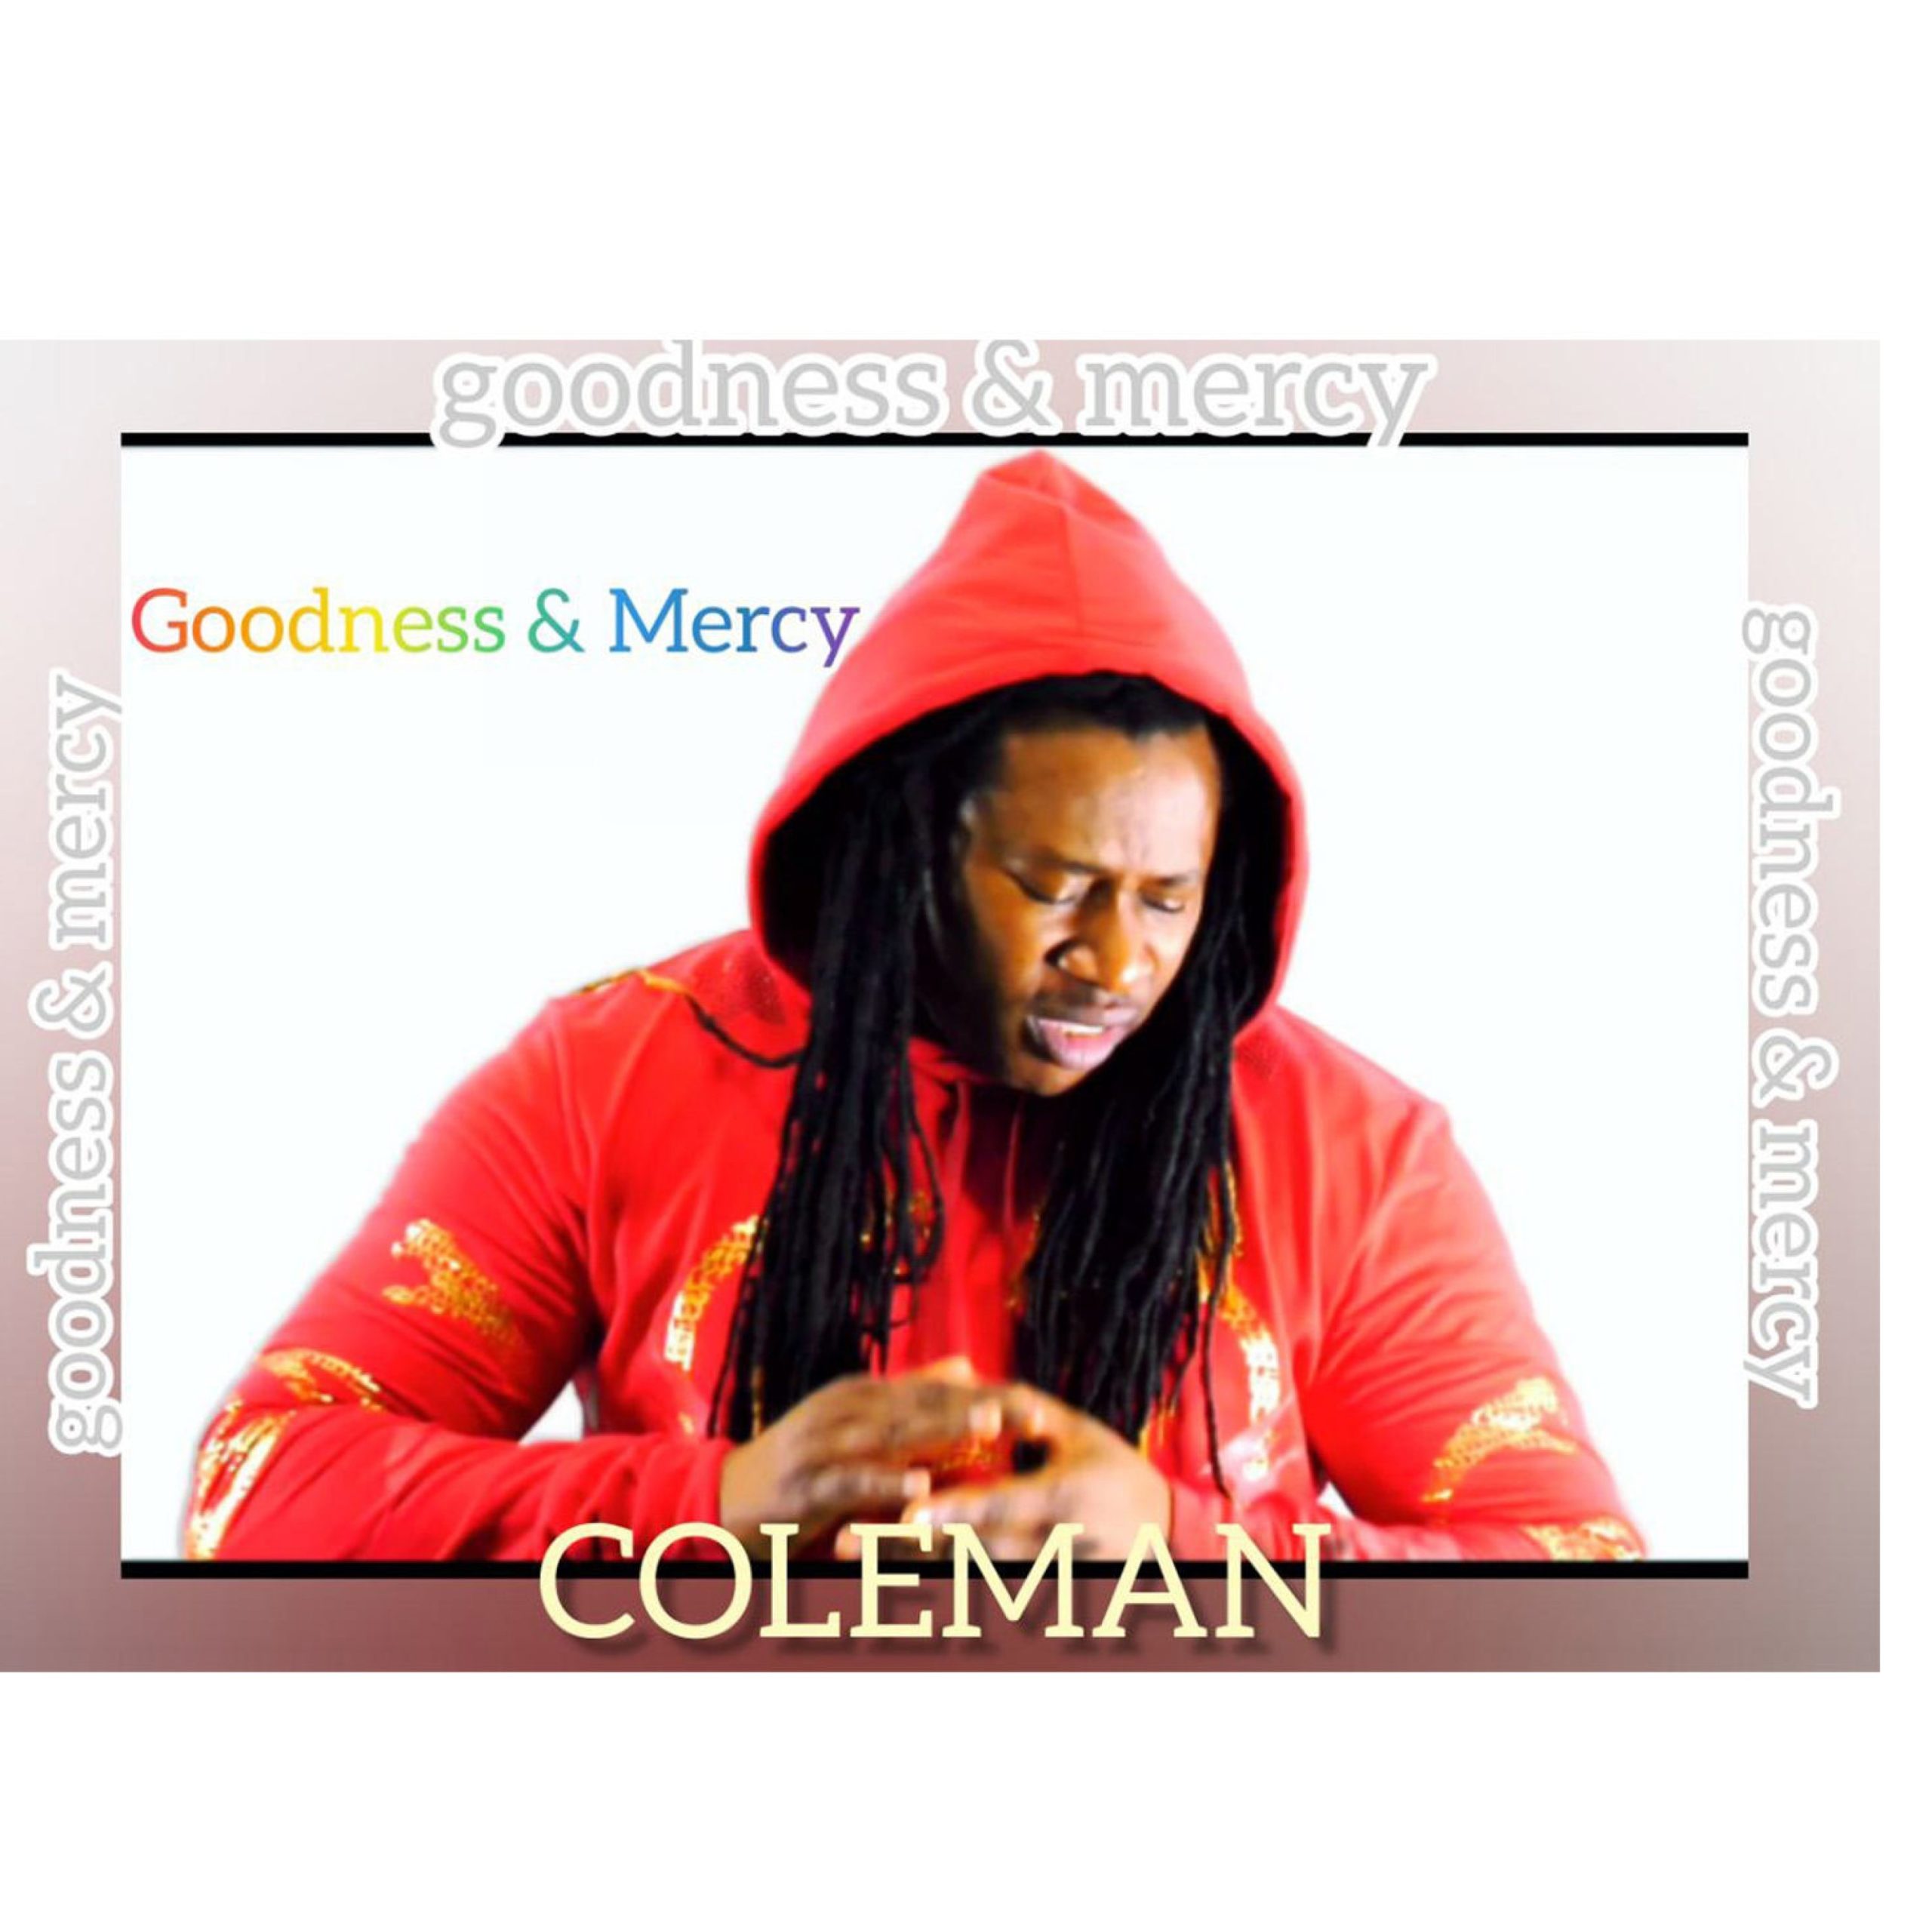 DOWNLOAD Music: Coleman - Goodness & Mercy